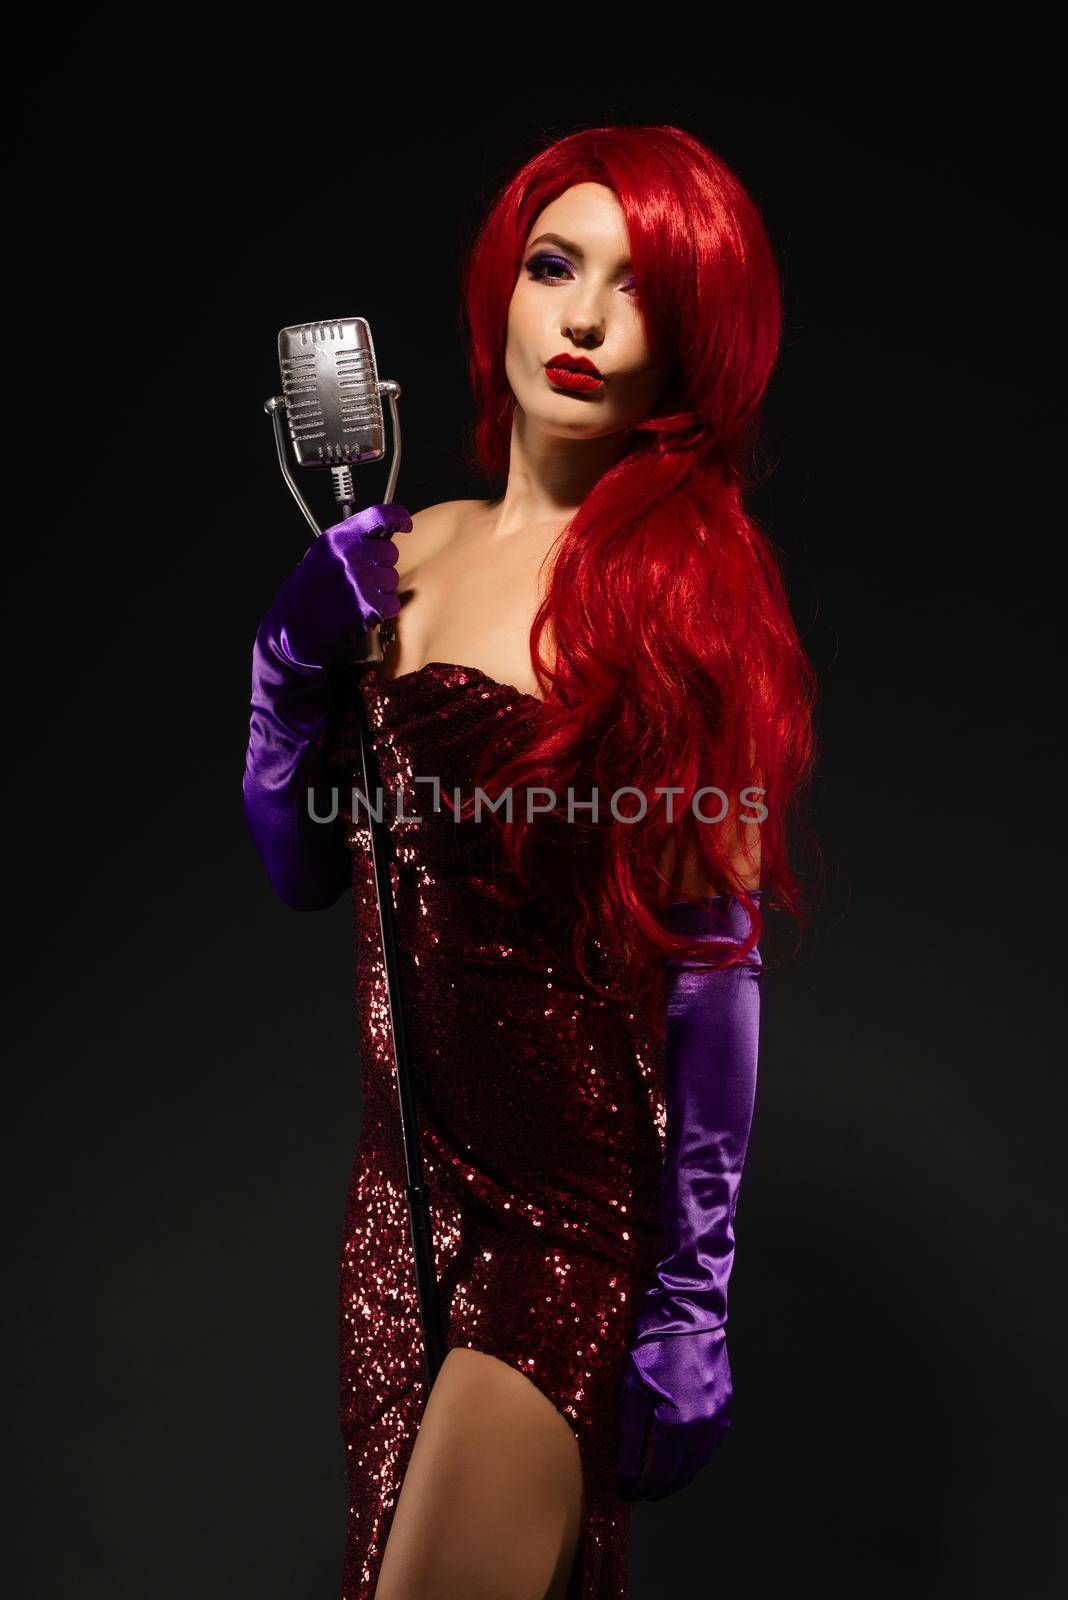 Young romantic redhead woman with very long hair in red dress with microphone on the stand licked lips in a kiss on a black background. Sexy gown on a beautiful slim figure. Long pink gloves